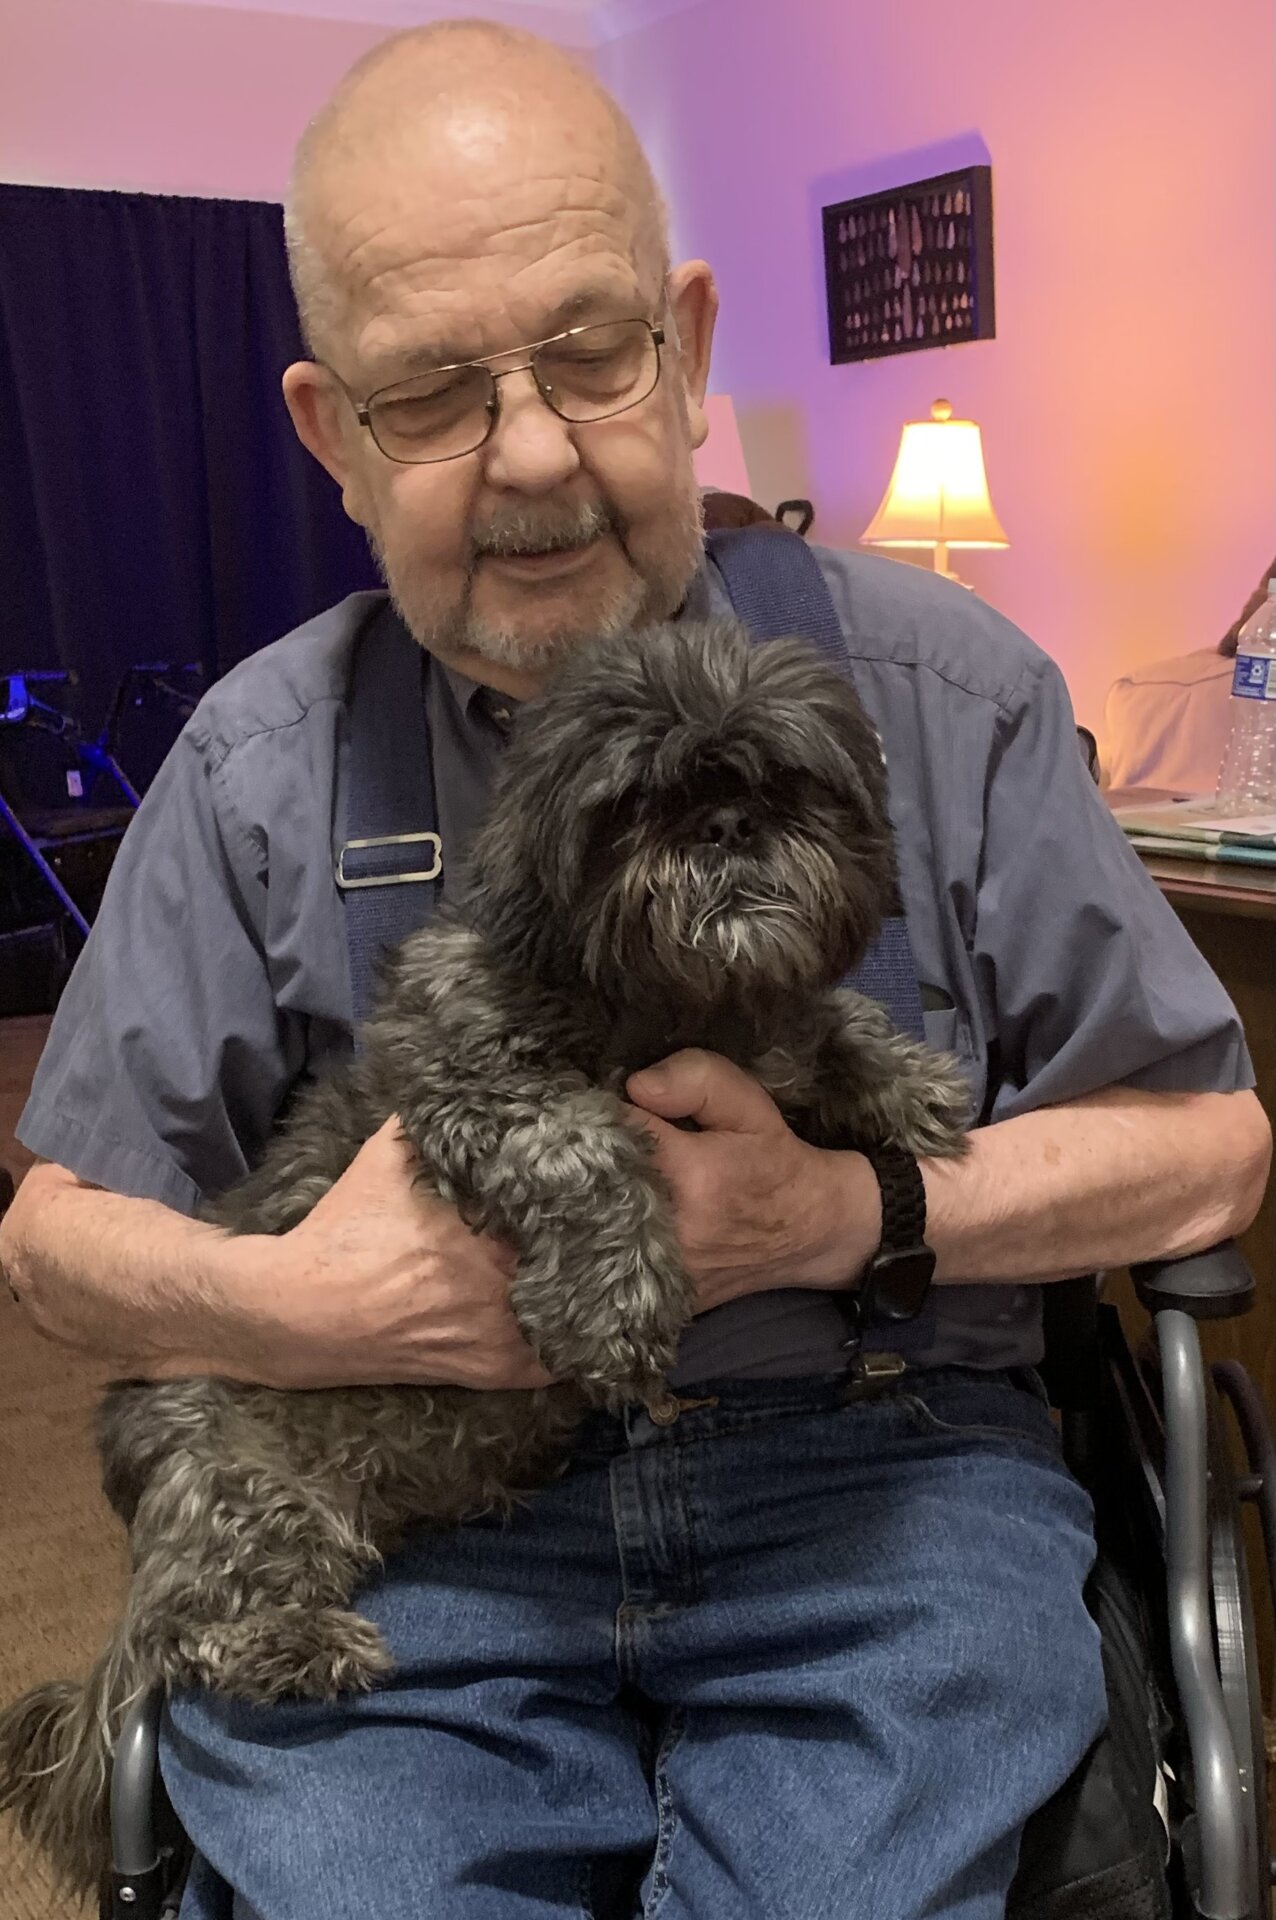 An elderly resident of a Traditions Management senior living facility holding a small long-haired black dog on his lap